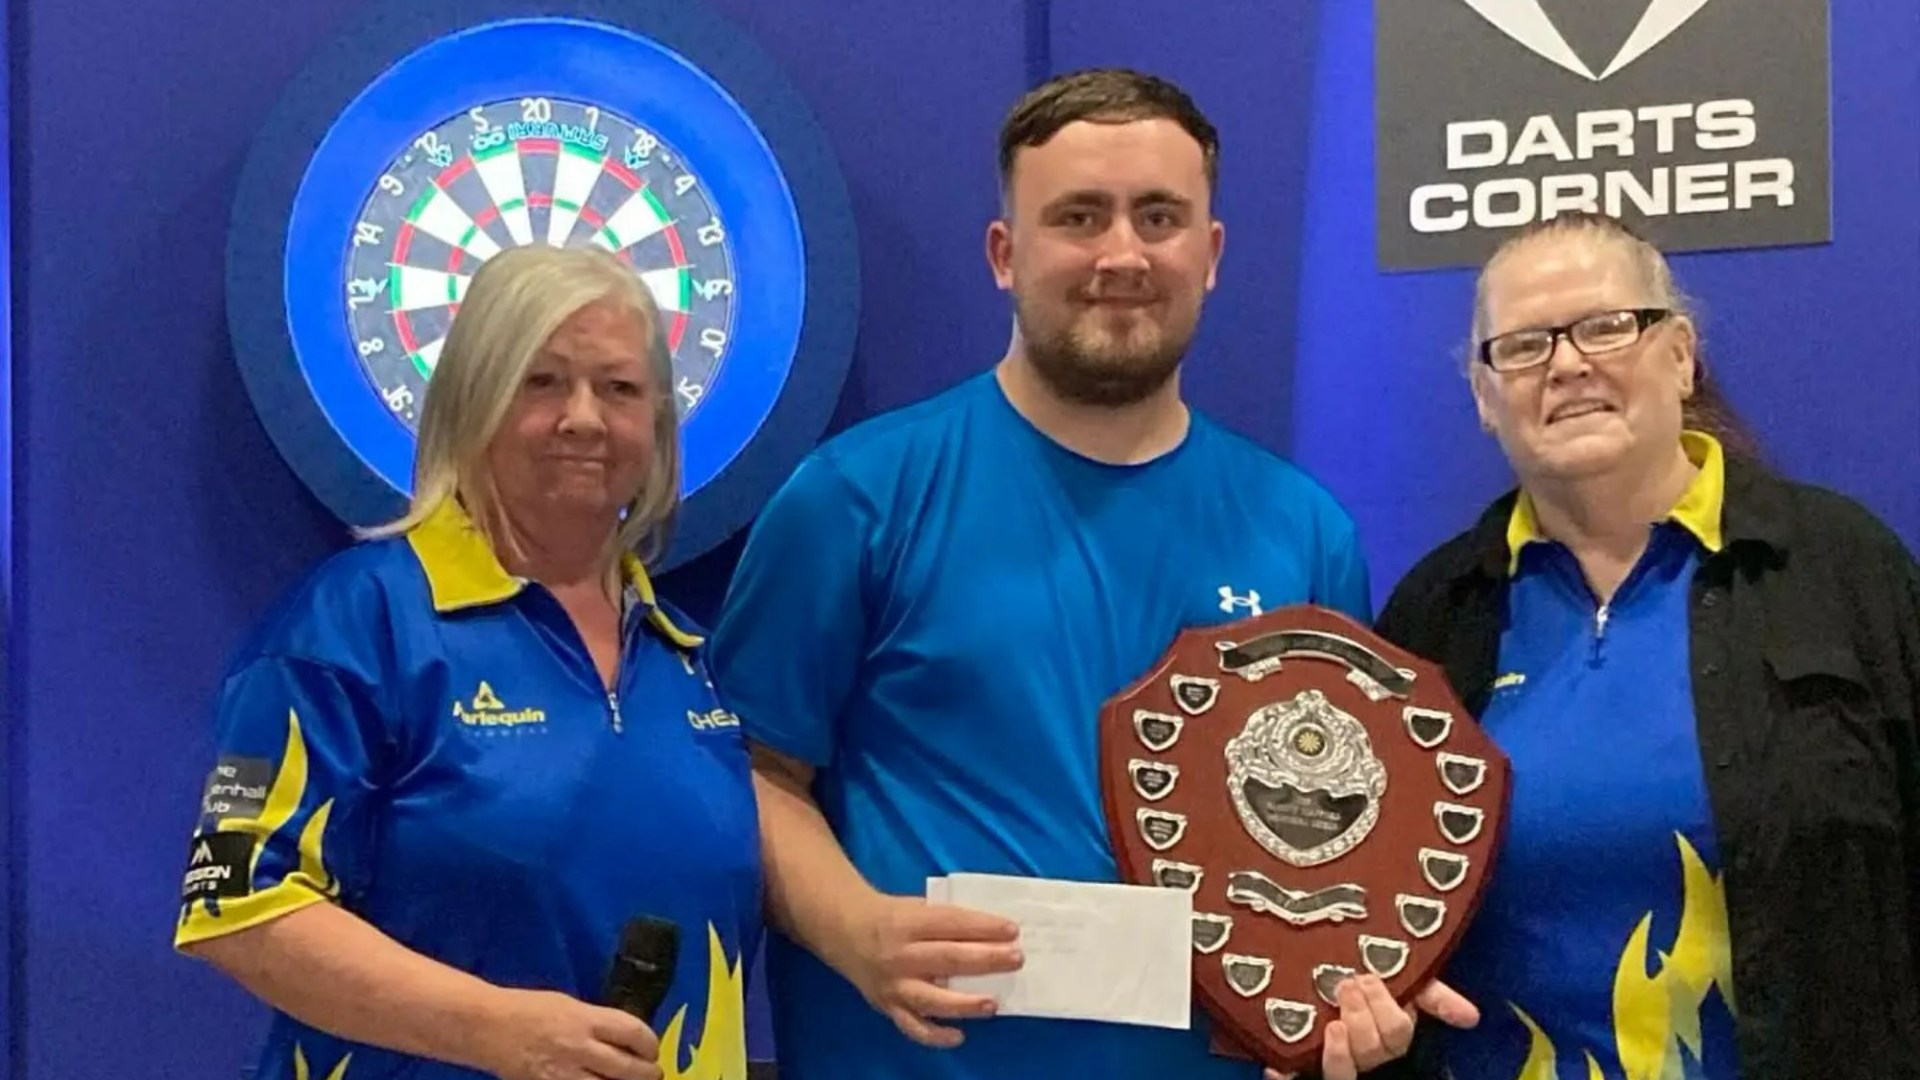 Luke Littler stuns fans after rocking up to local tournament and winning days after World Matchplay first-round exit [Video]